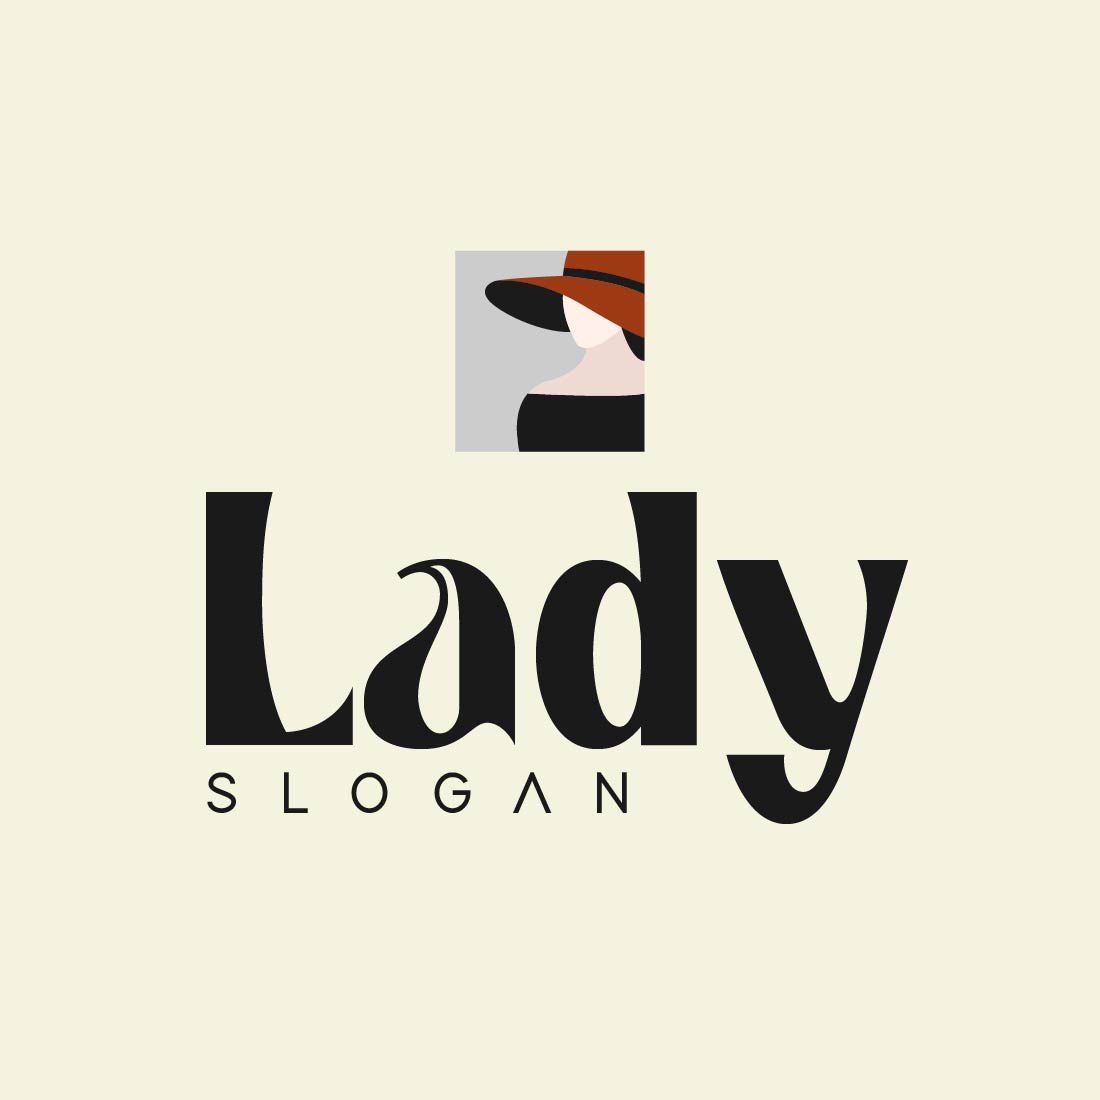 Lady logo preview on a light background.